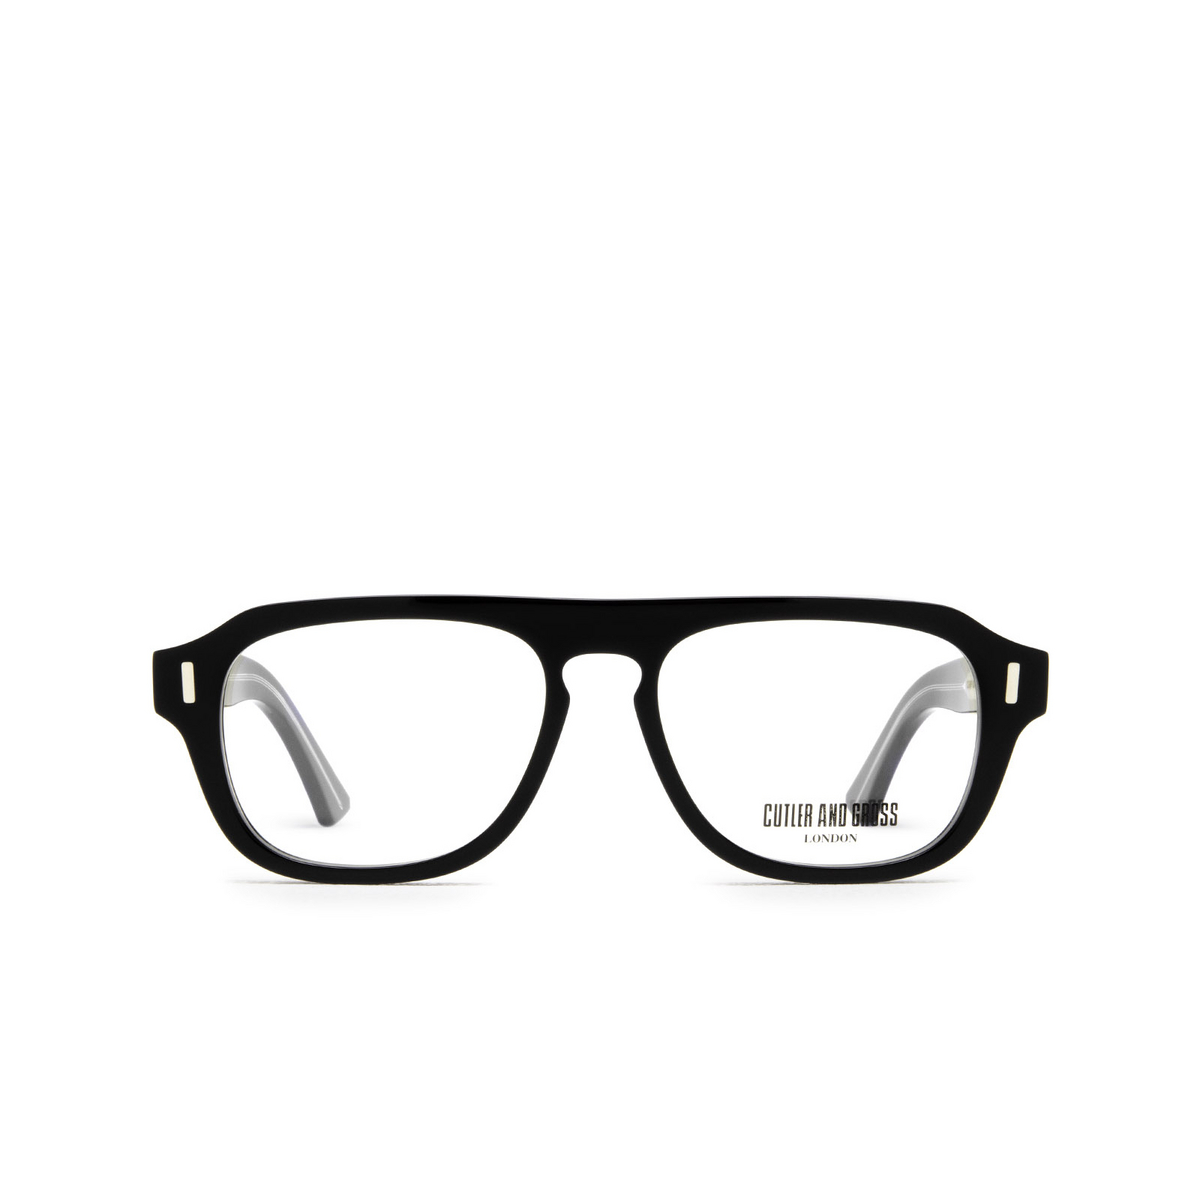 Cutler and Gross 1319 Eyeglasses 01 Black - front view